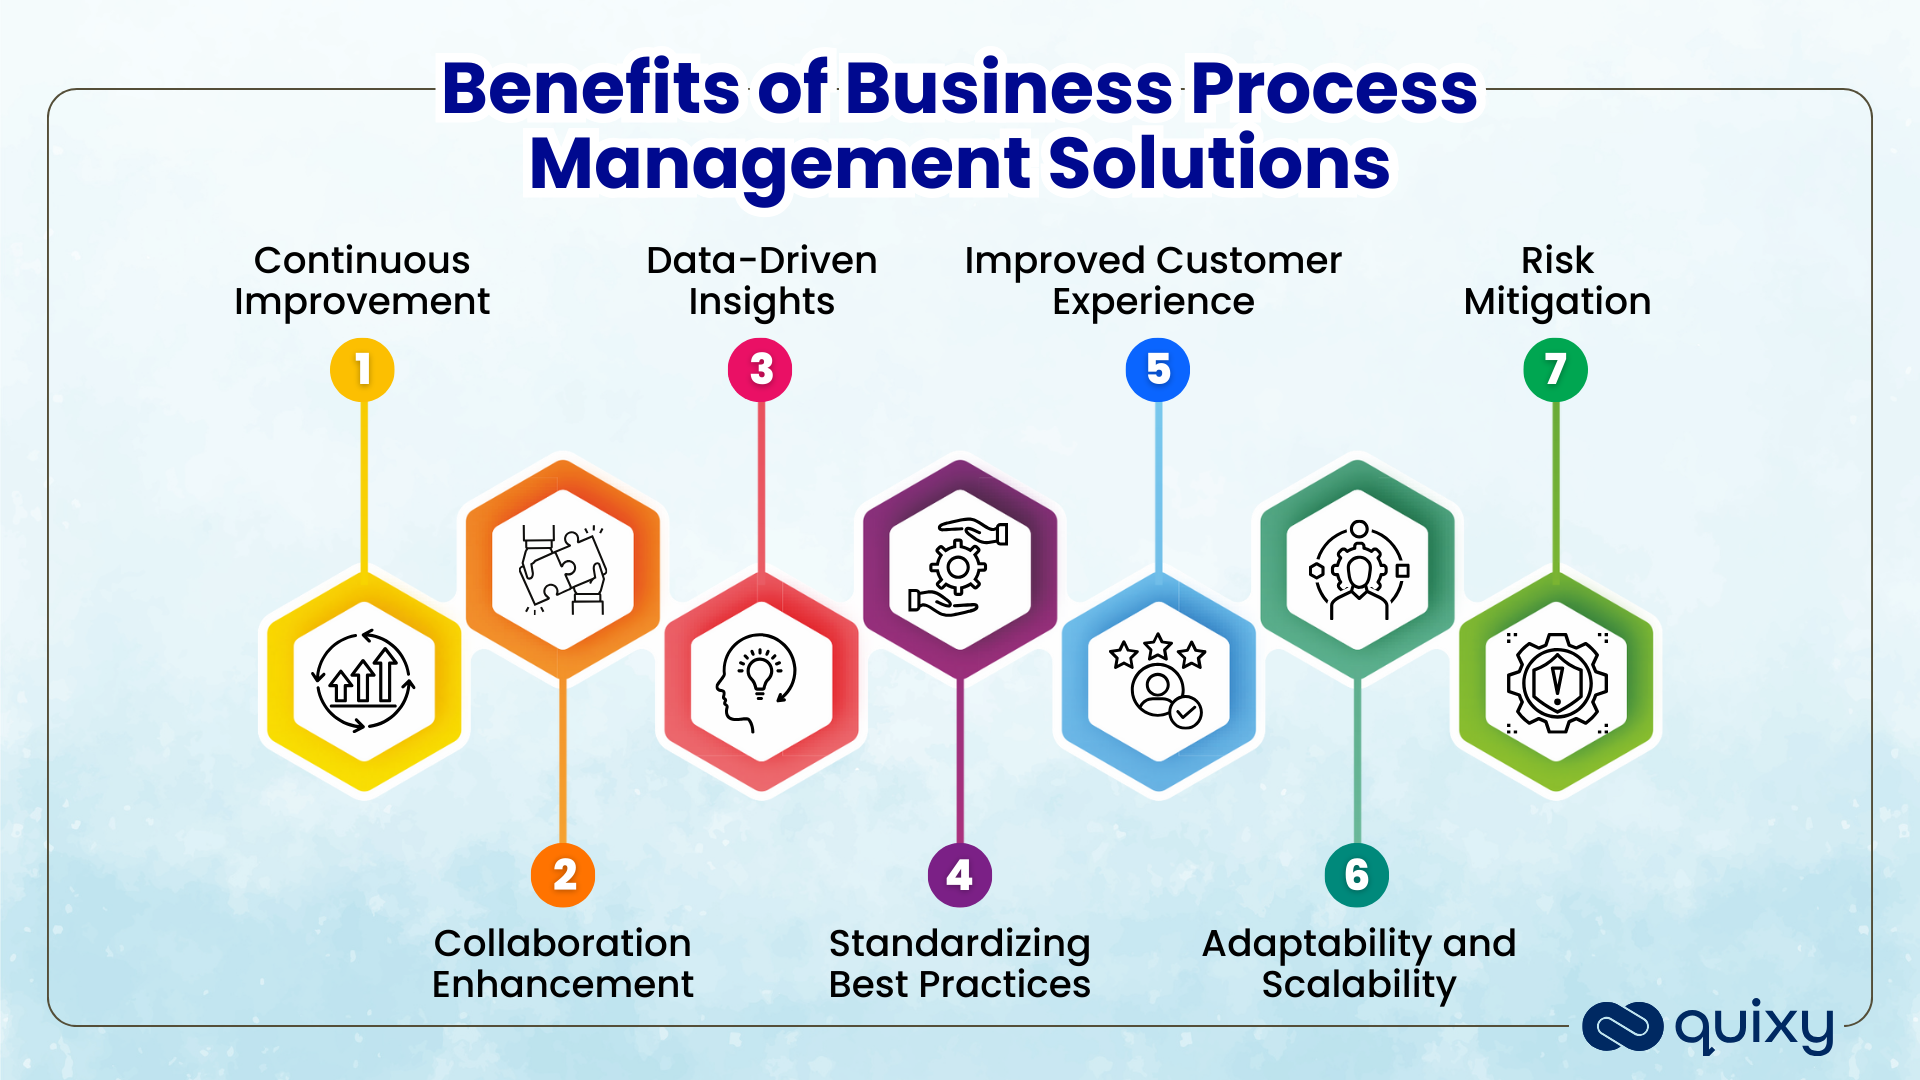 Why Choose Quixy as Your Business Process Management Software? | Quixy